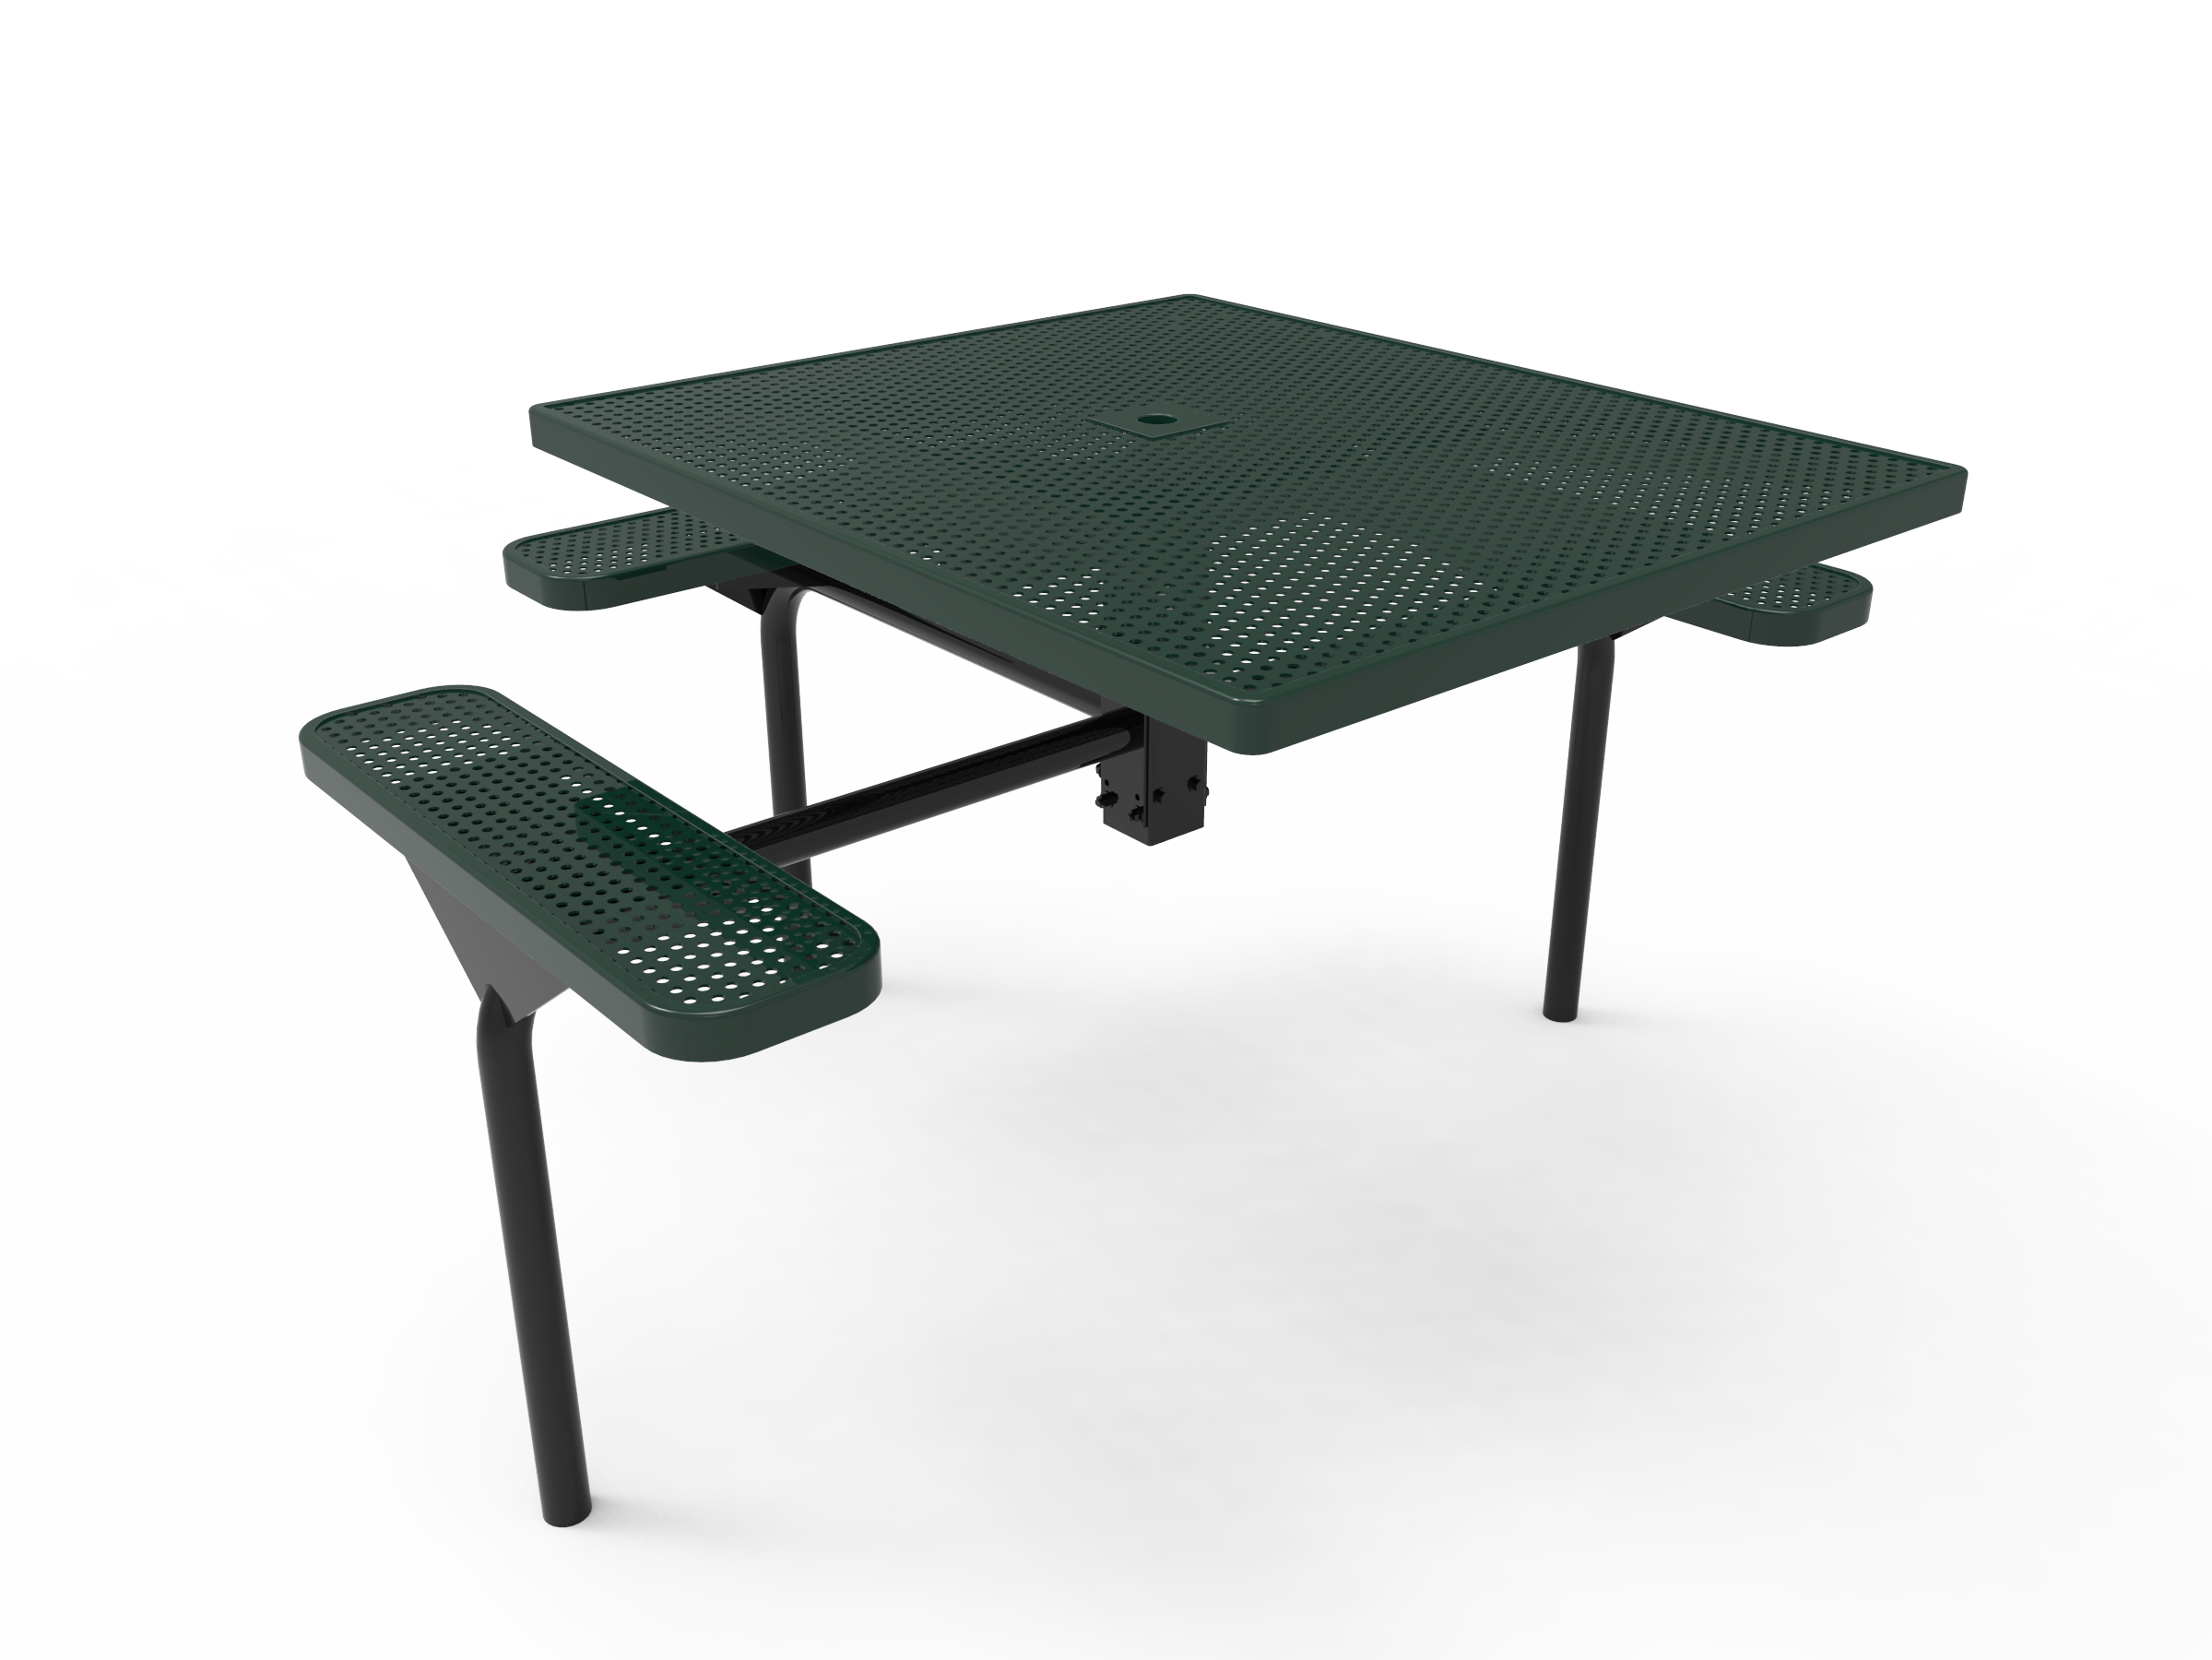 Lexington Square Nexus Pedestal Table - ADA Accessible, Frame with Powder Coat Finish, Top and Seats with Advanced DuraLex Coating